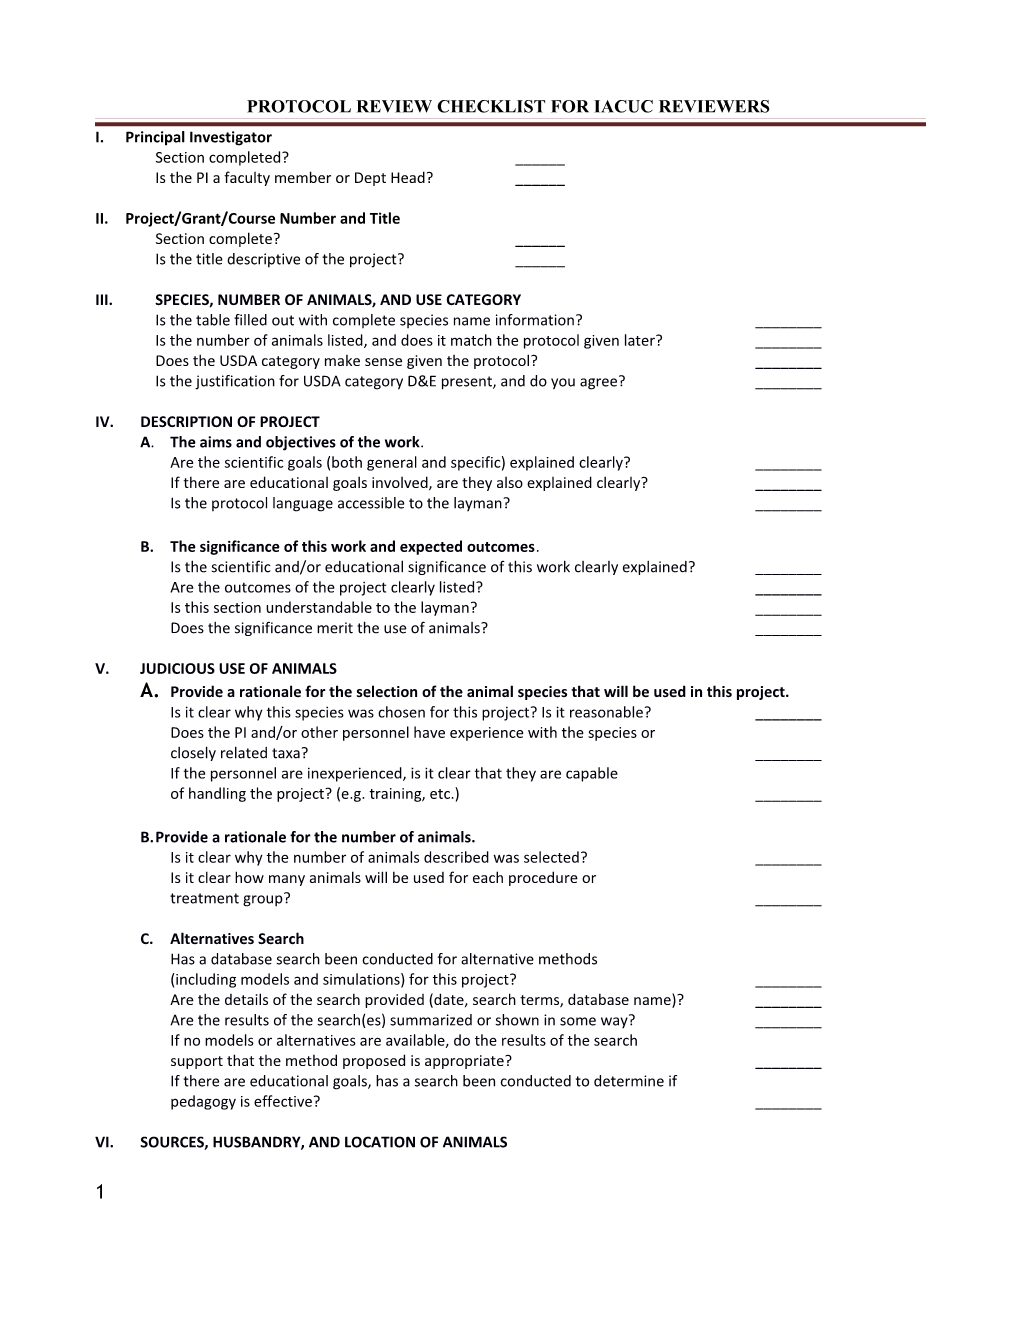 Protocol Review Checklist for Iacuc Reviewers